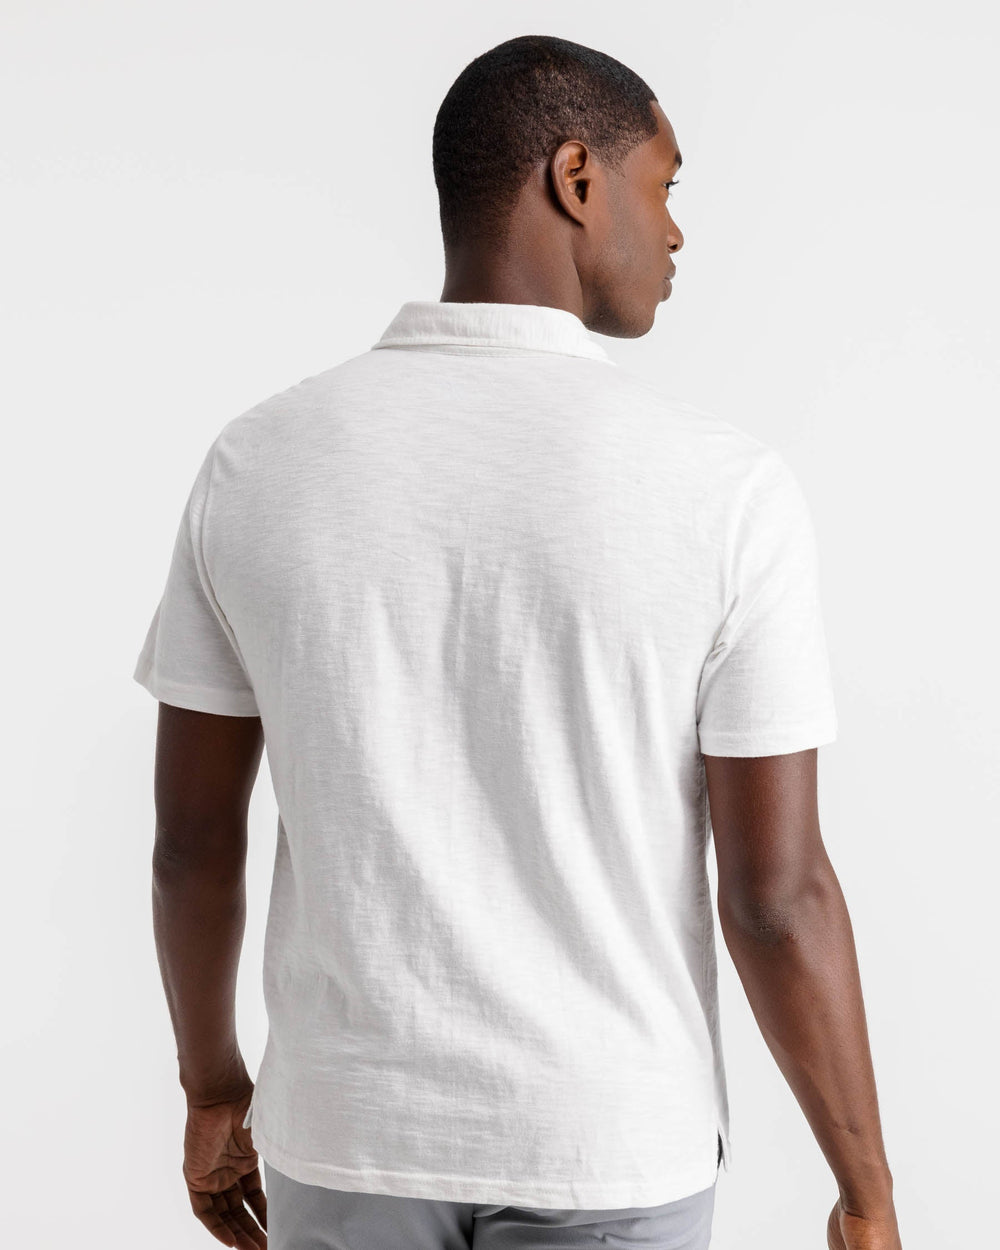 The back view of the Southern Tide Mesa Sun Farer Polo Shirt by Southern Tide - Classic White